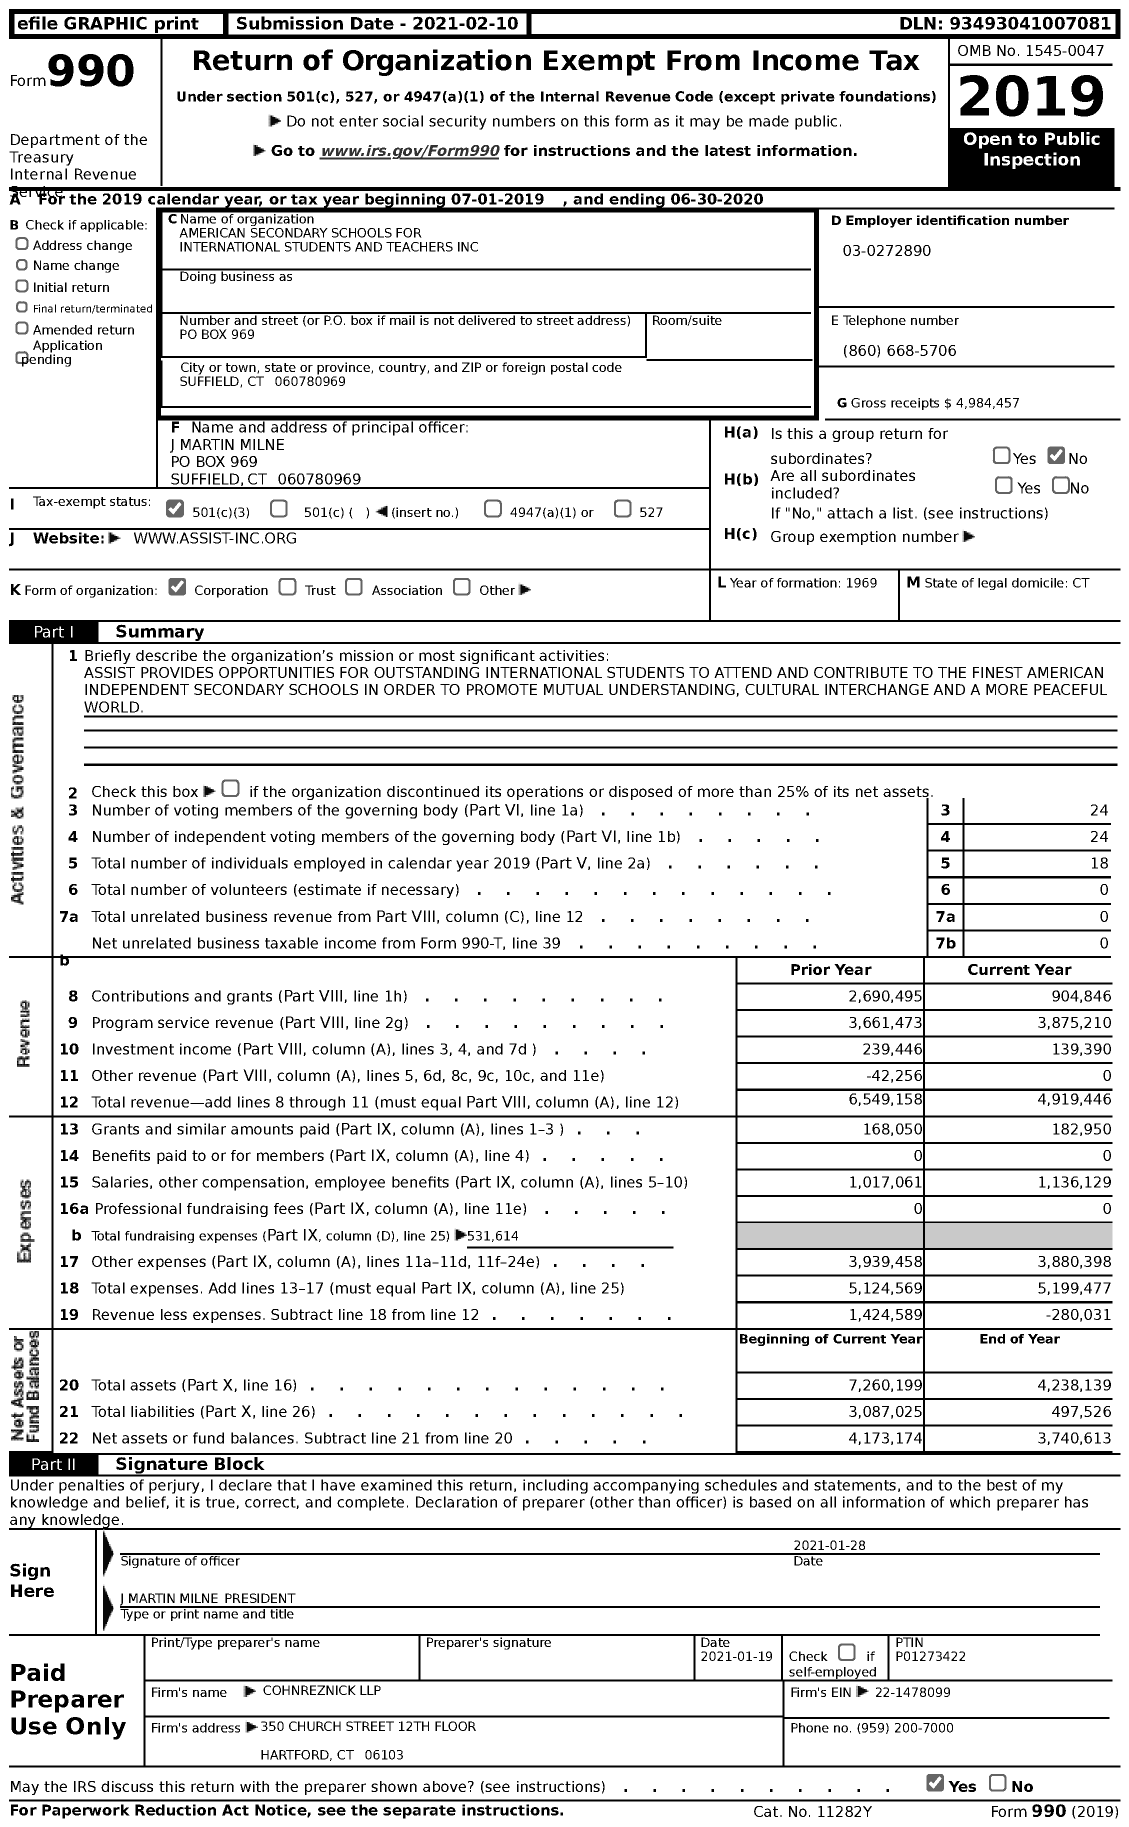 Image of first page of 2019 Form 990 for American Secondary Schools for International Students and Teachers (ASSIST)